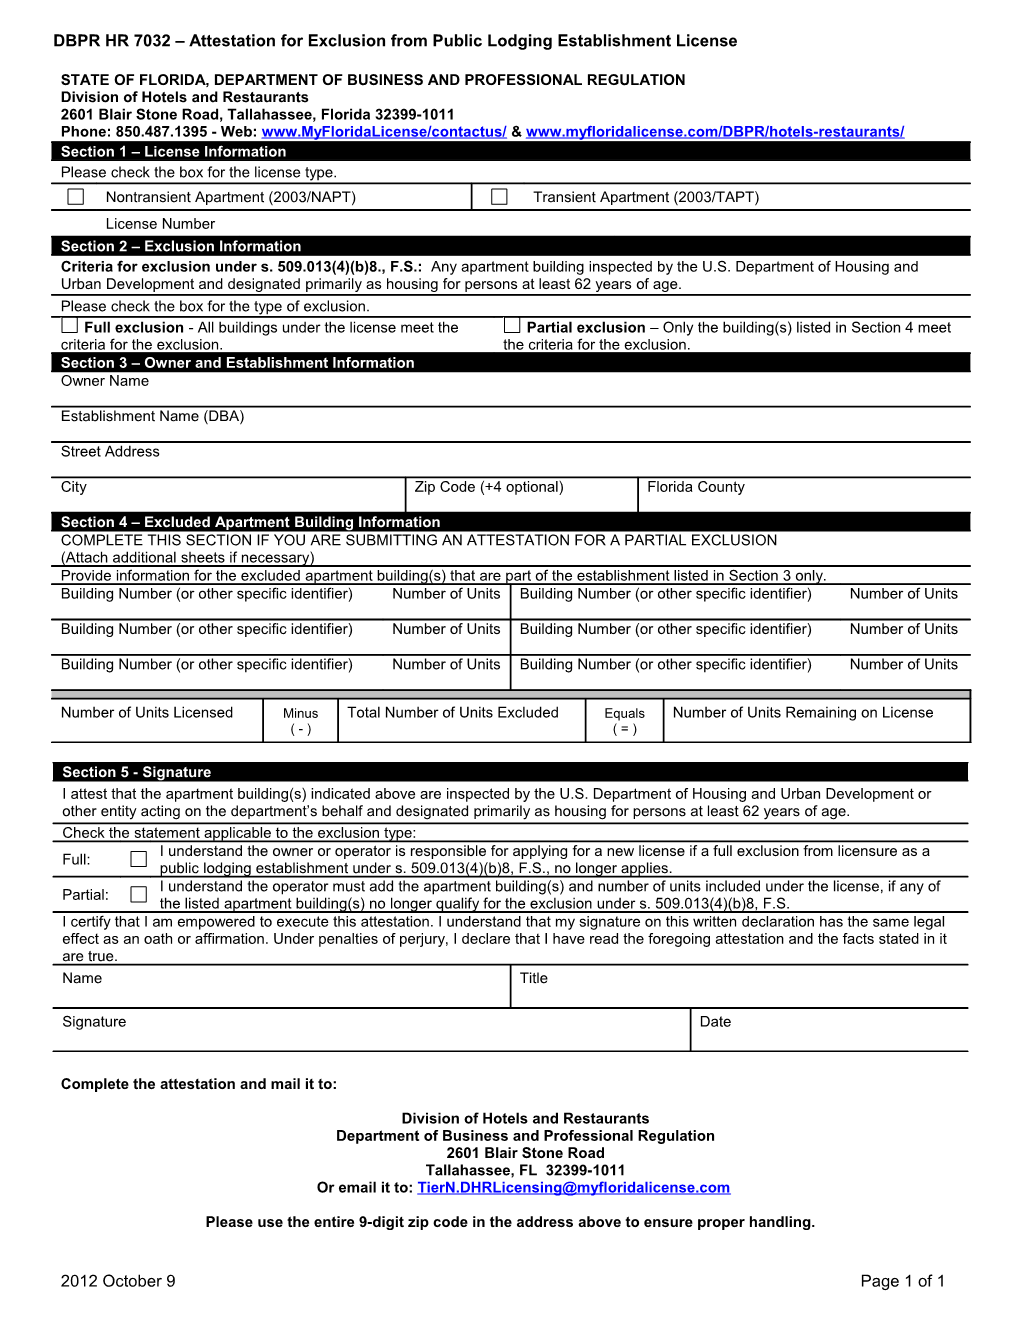 DBPR HR 7032 Attestation for Exclusion from Public Lodging Establishment License